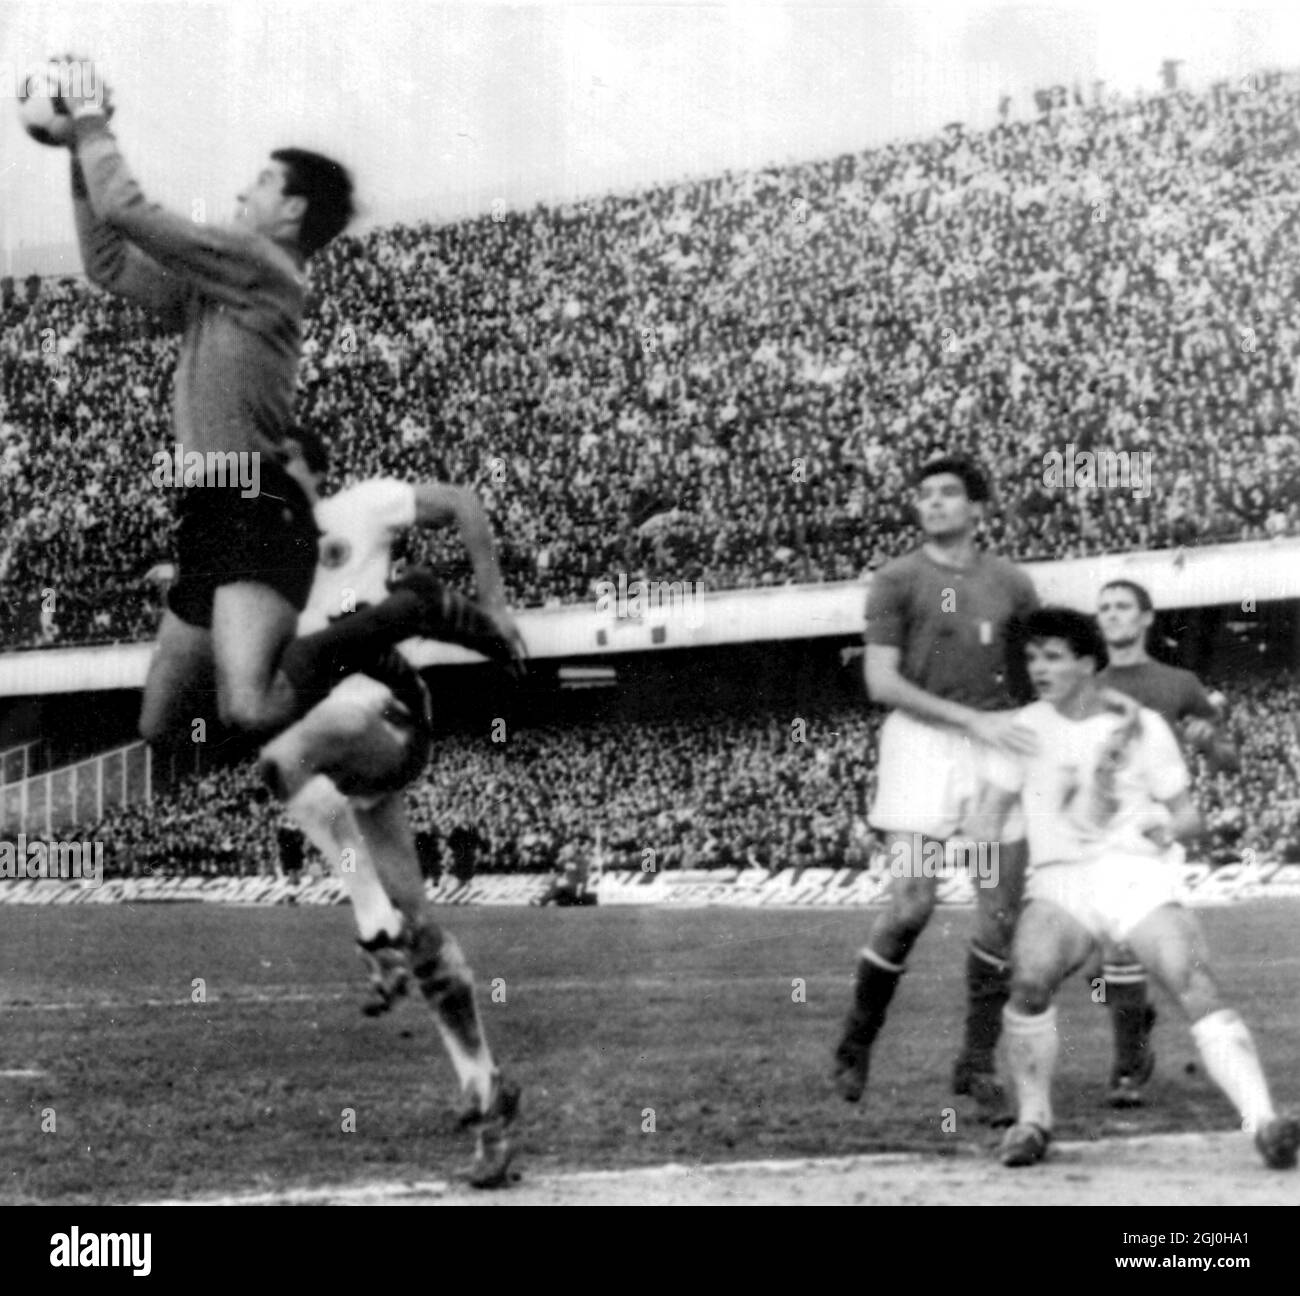 Naples, Italy: Action during todays Italy-Scotland World Cup Soccer Eliminator as Albertosi beat Yates to the ball and Facchetti and Forrest stand by. Italy won 3-0. 7 December 1965 Stock Photo